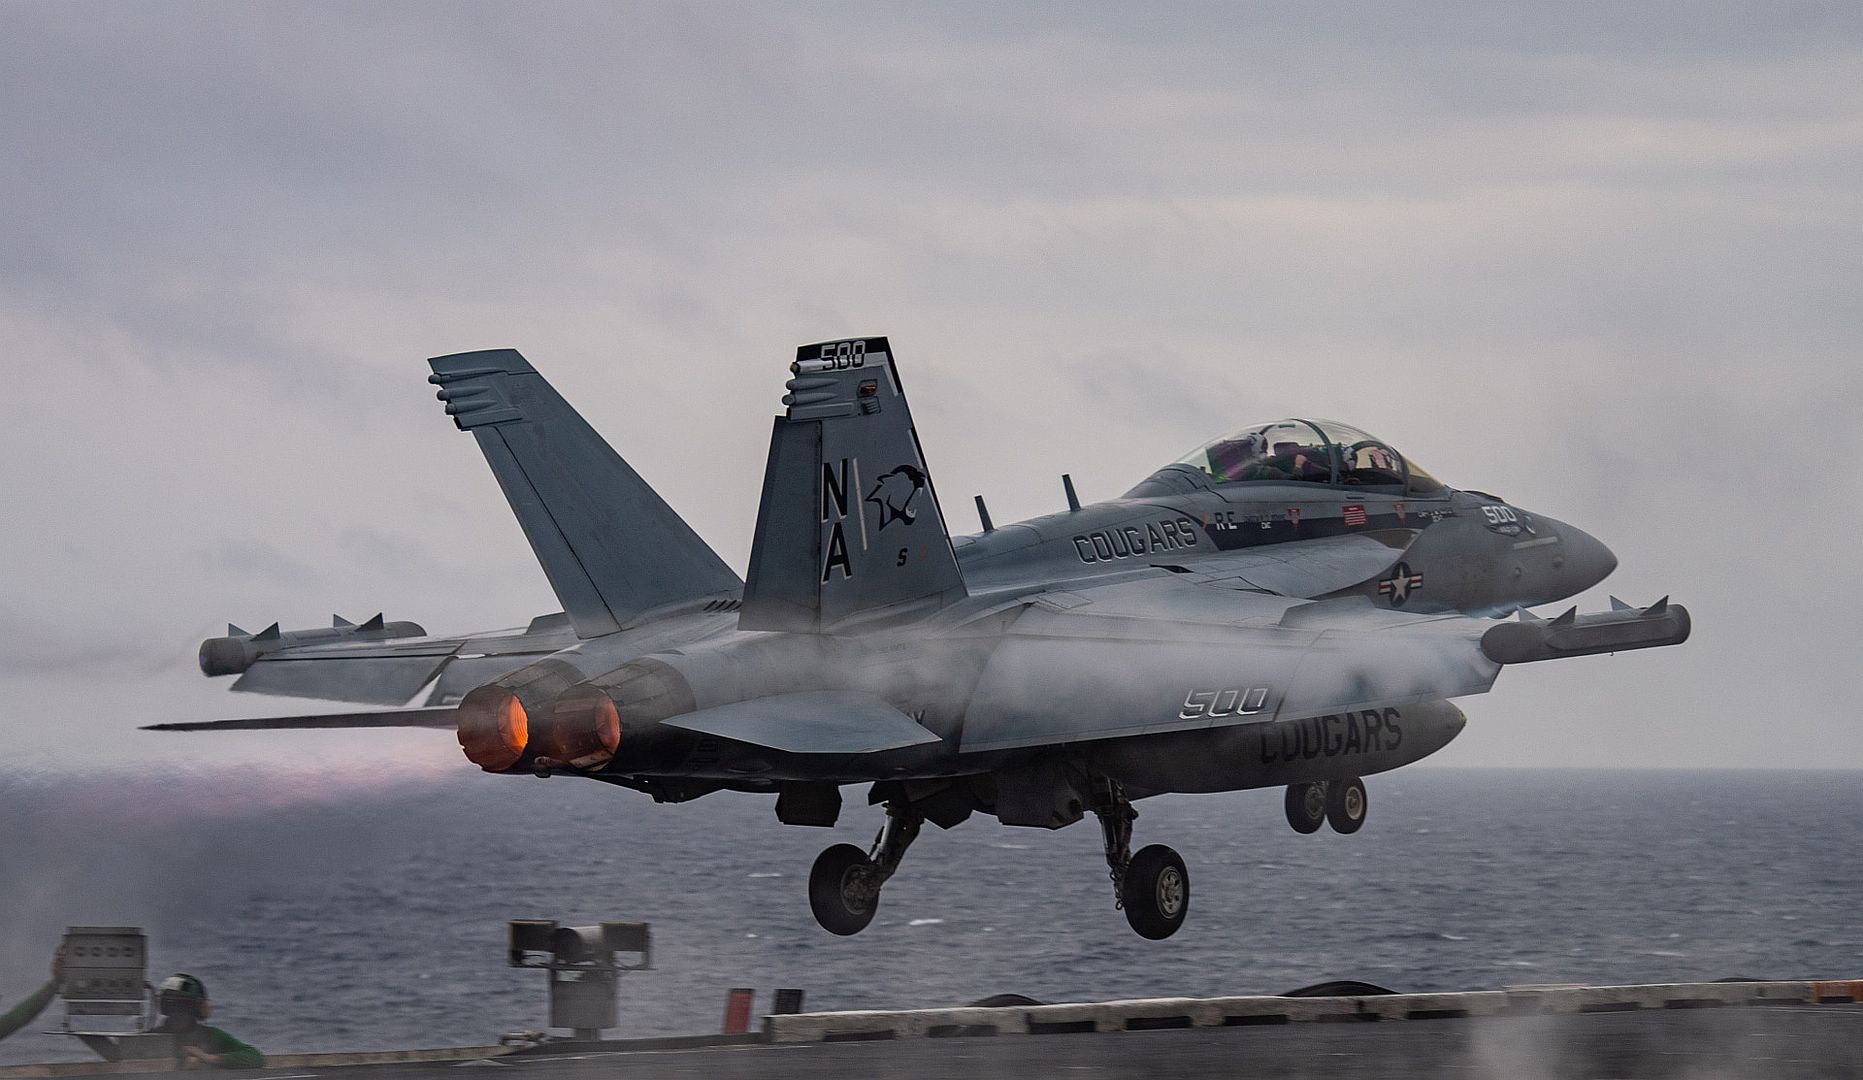  139 Launches From The Flight Deck Of The Aircraft Carrier USS Nimitz Tq9RQywDCRomkcFsN3RdEp